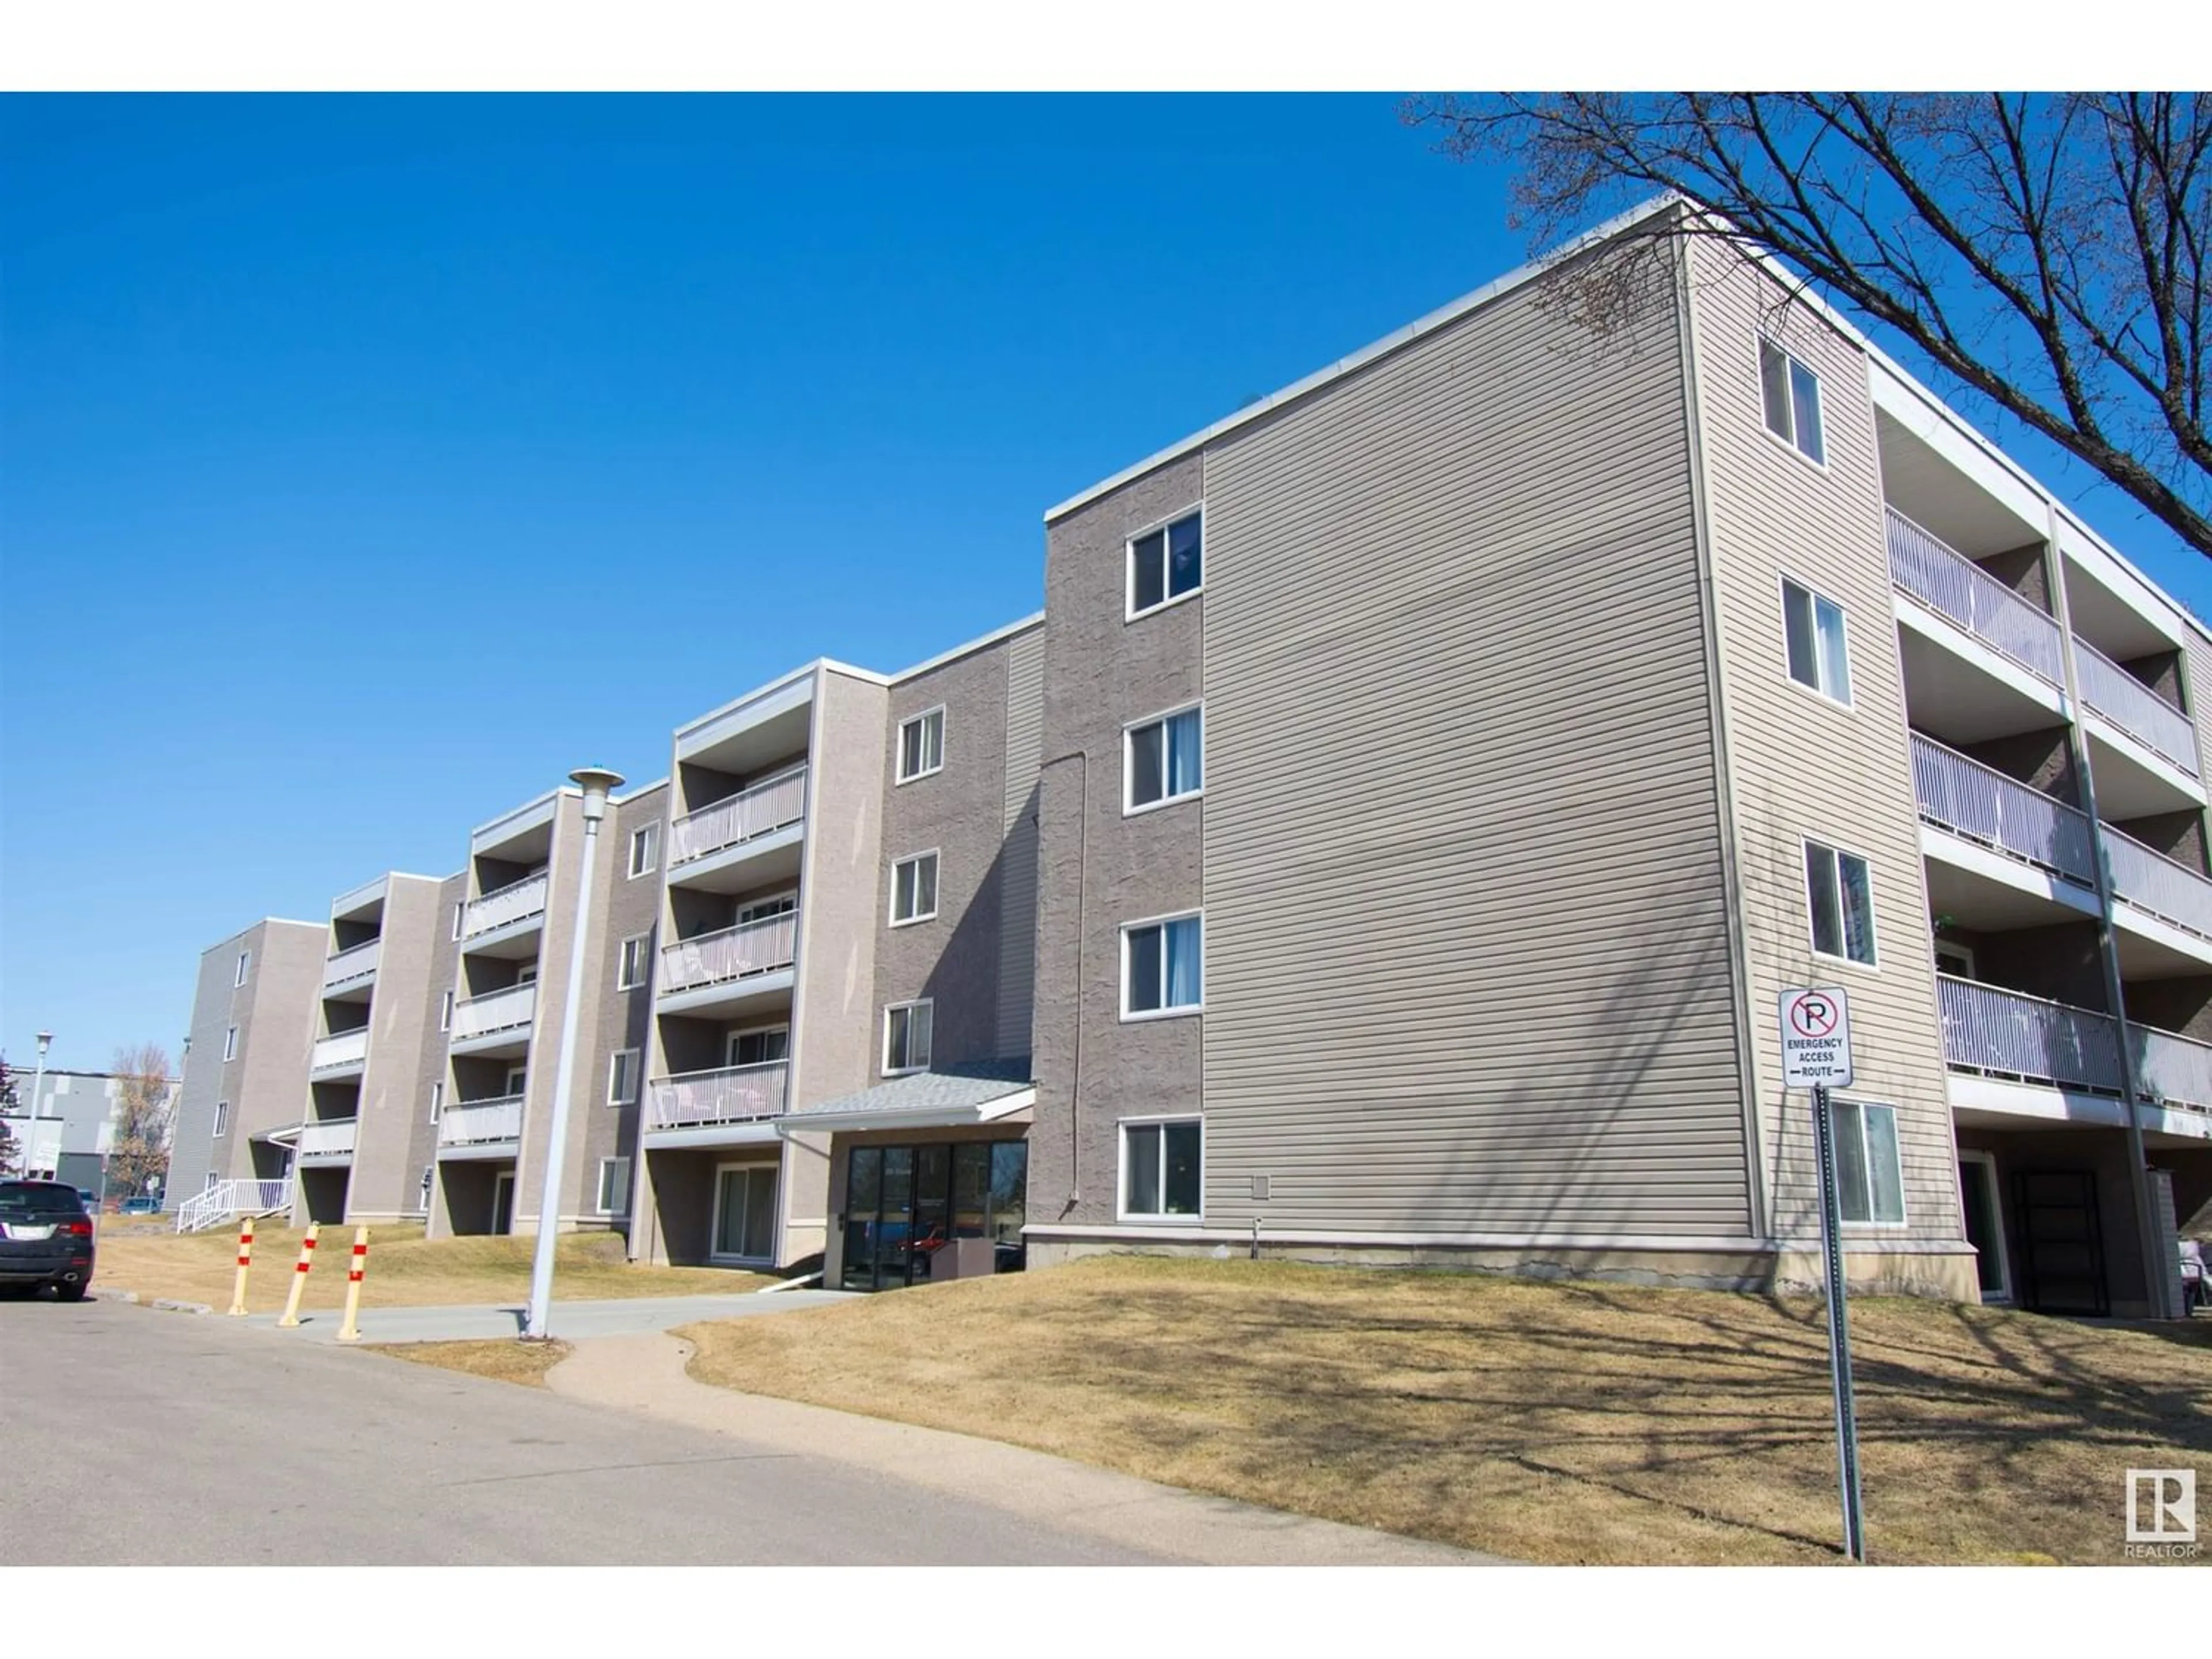 A pic from exterior of the house or condo for #402 18204 93 AV NW, Edmonton Alberta T5T1V2